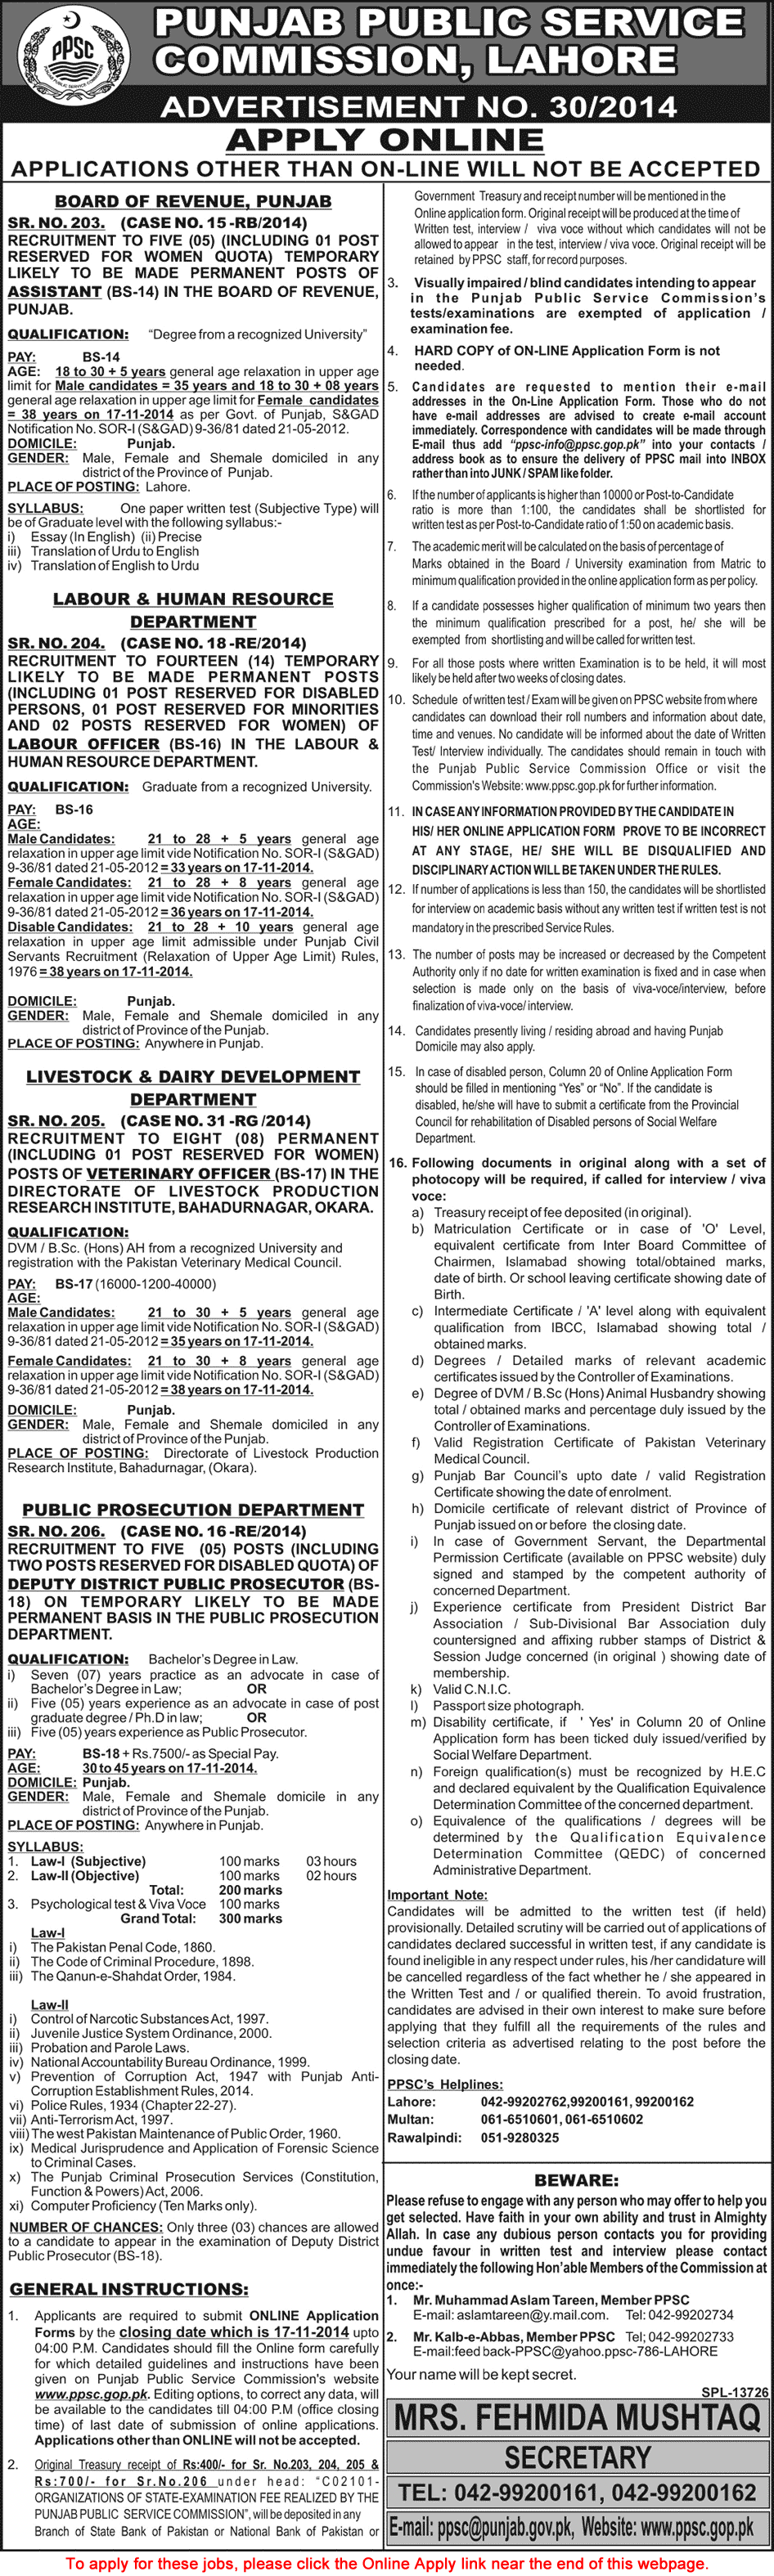 punjab-public-service-commission-jobs-october-2014-consolidated-advertisement-latest-new-in